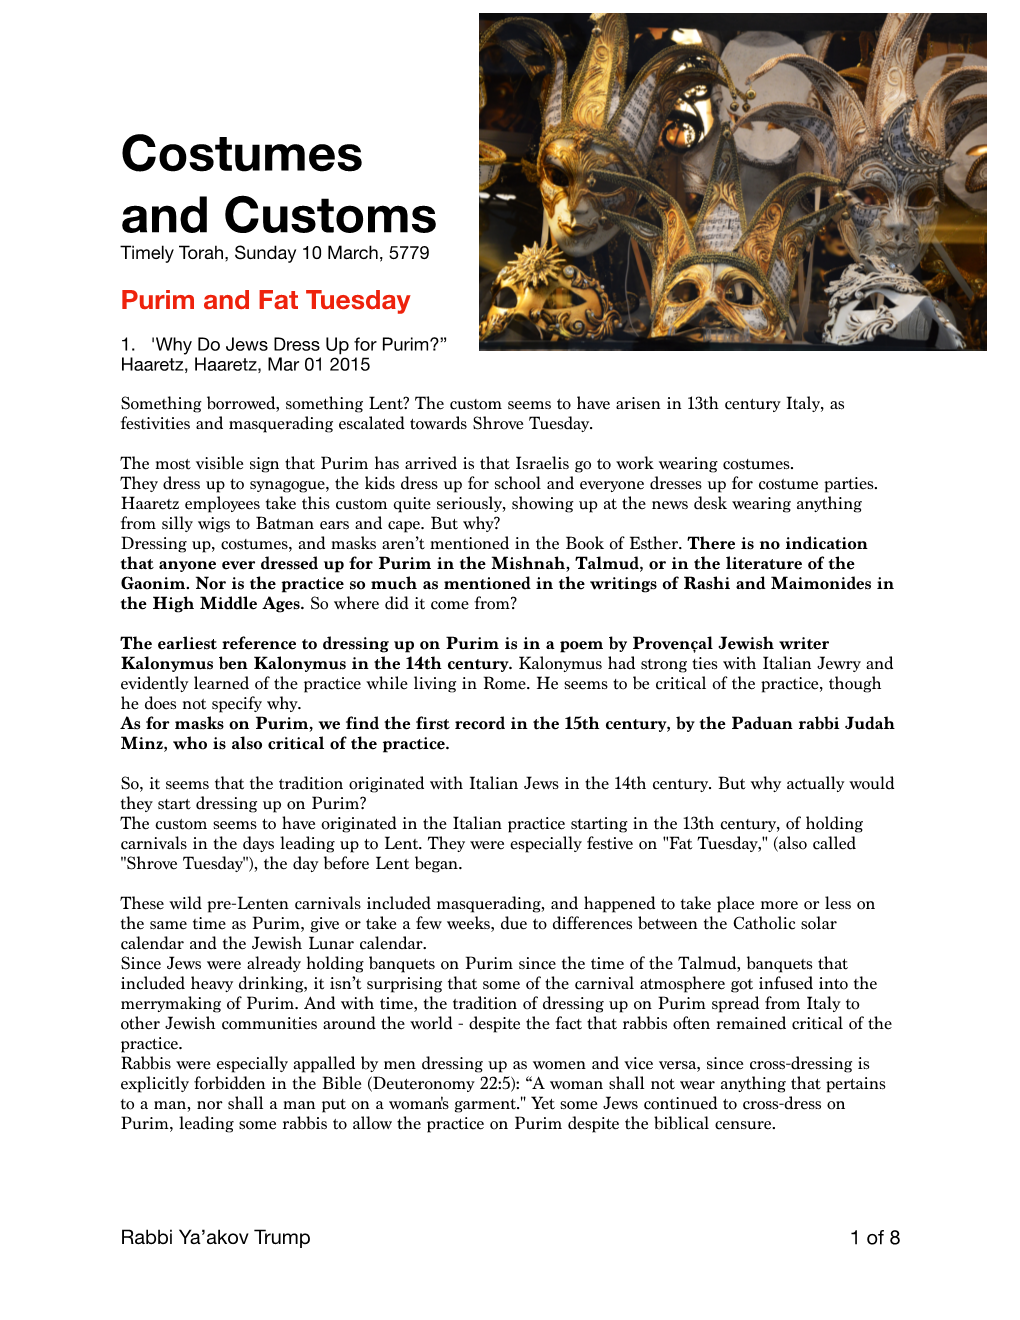 Customs and Costumes SOURCES